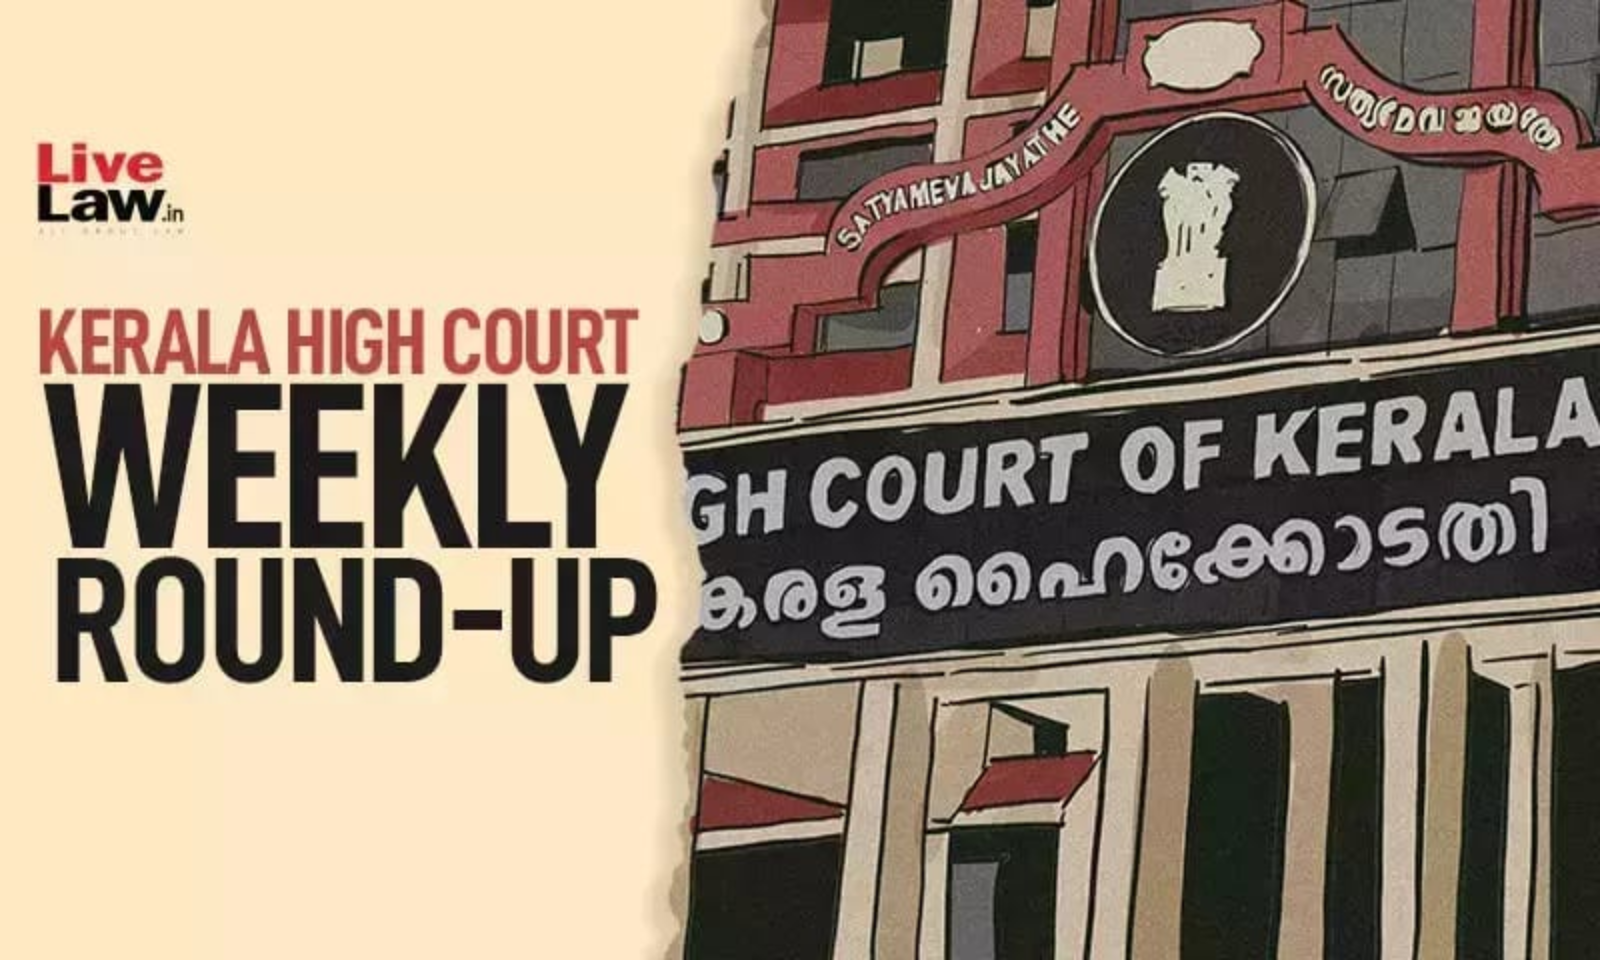 Sexxxxhdvideo - Kerala High Court Weekly Round-Up: June 5 To June 11, 2023